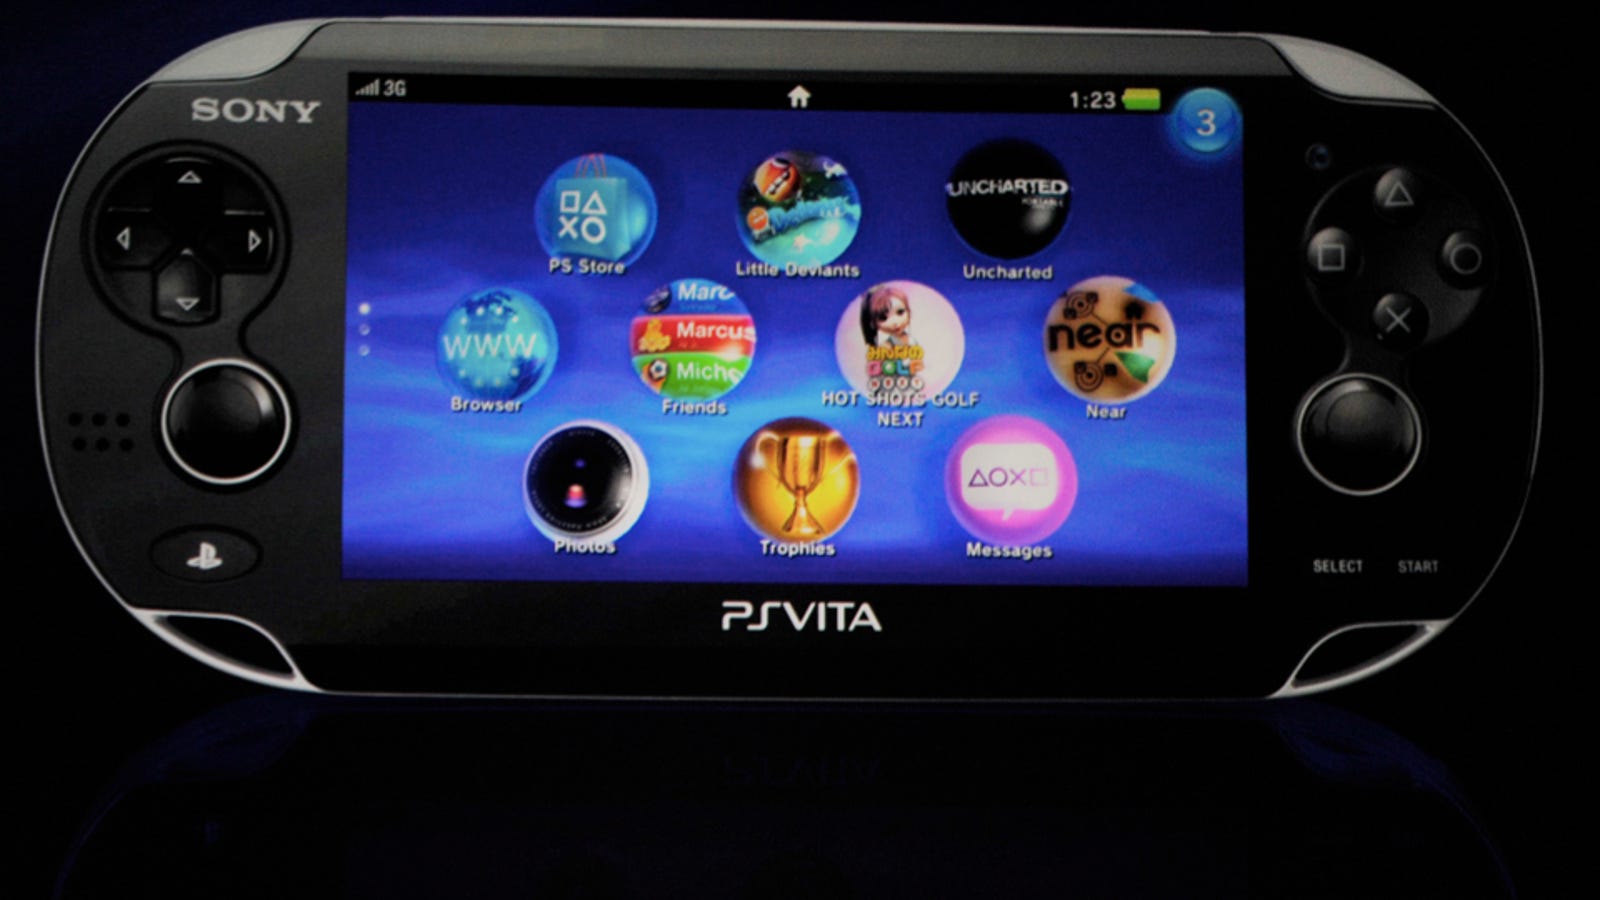 How many PS Vita games are there?